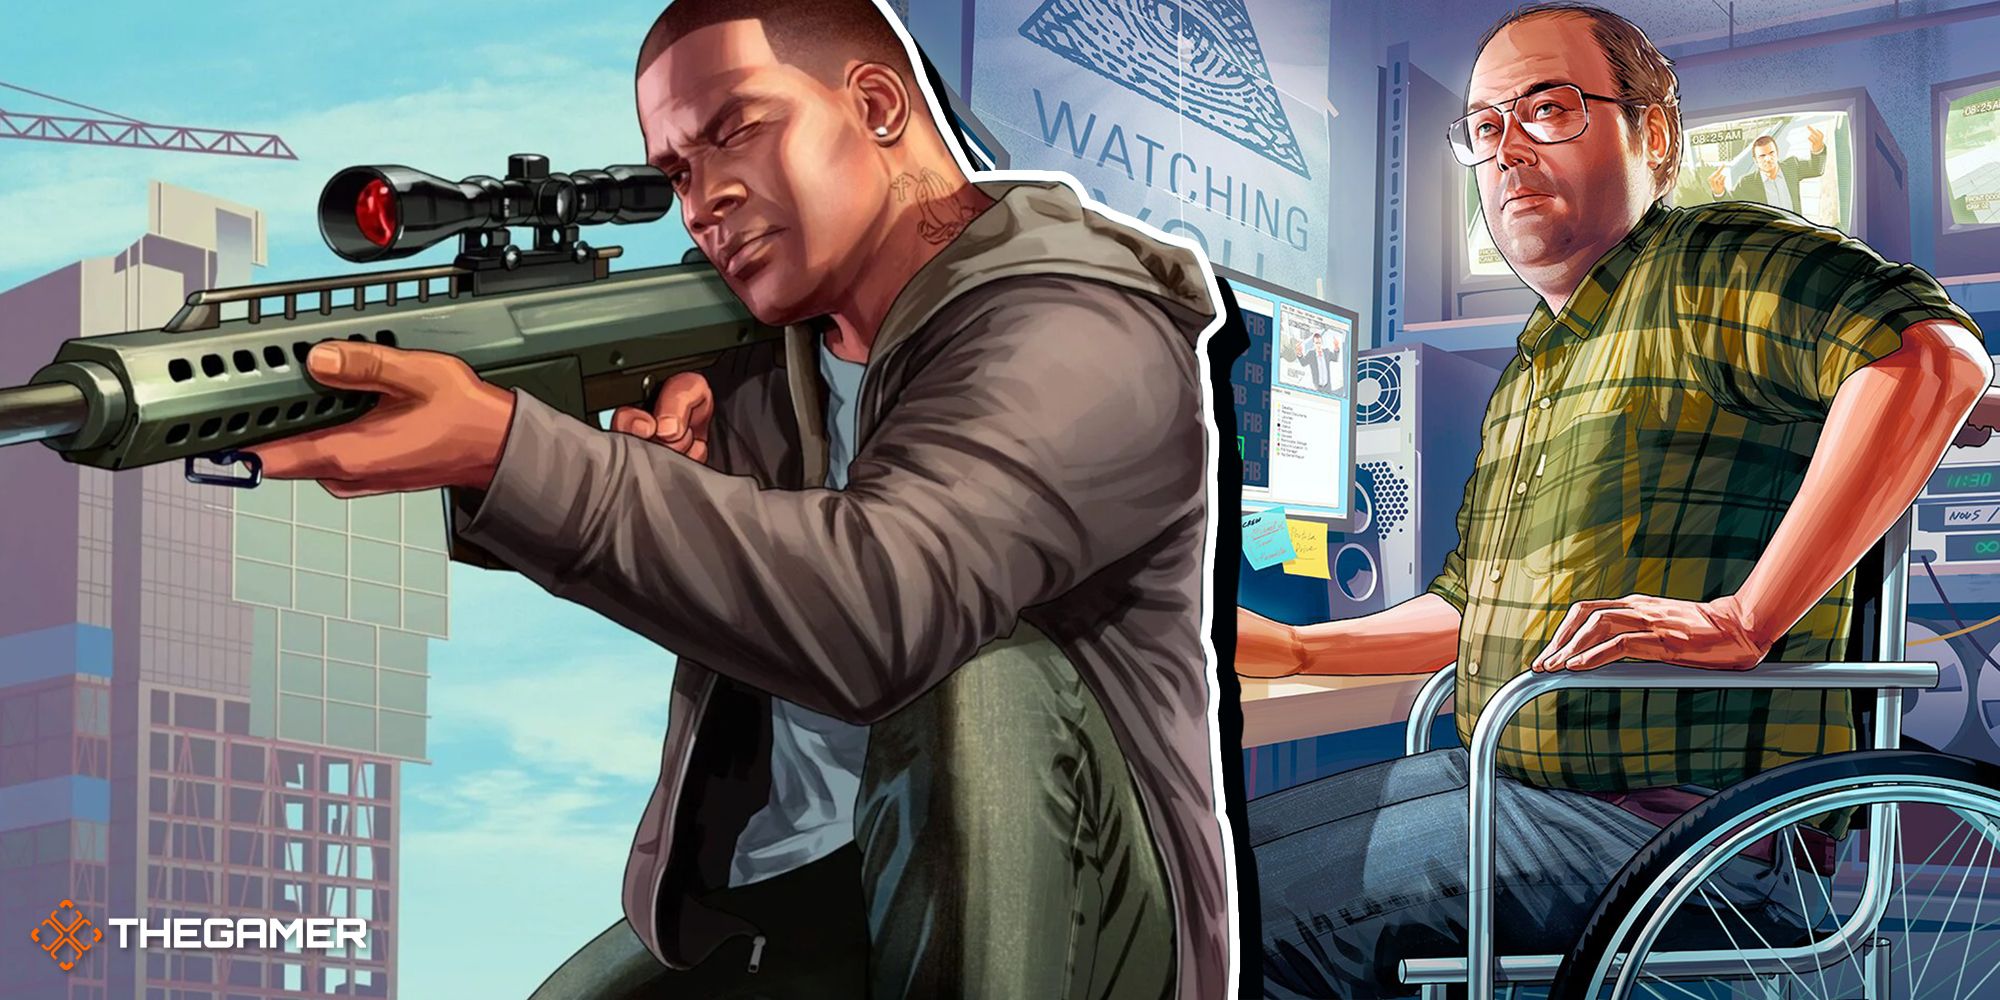 Which stocks to invest in during GTA 5's assassination missions